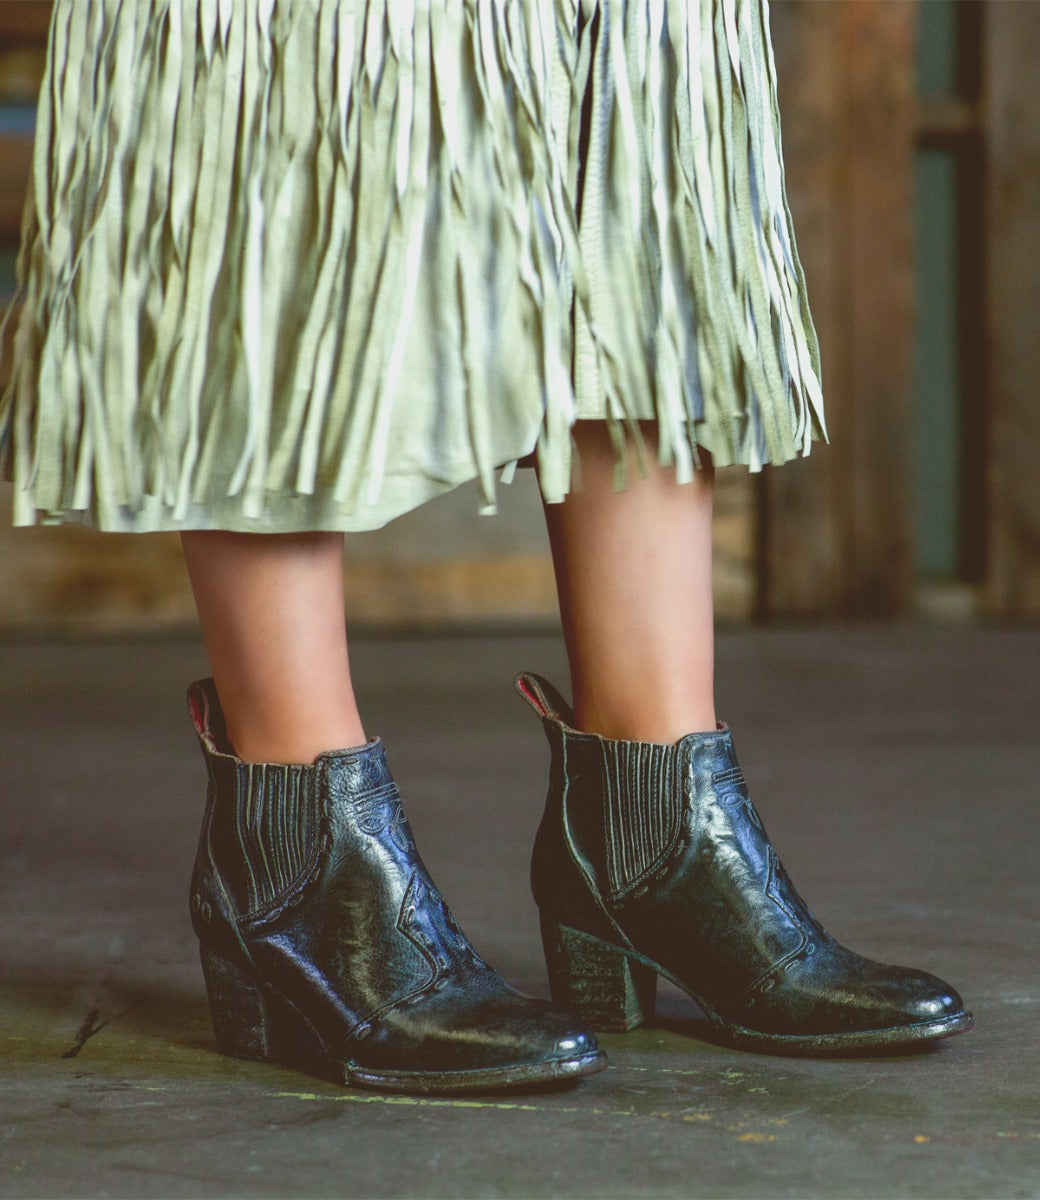 A woman wearing black Bed Stu Brie II boots and a fringe skirt.